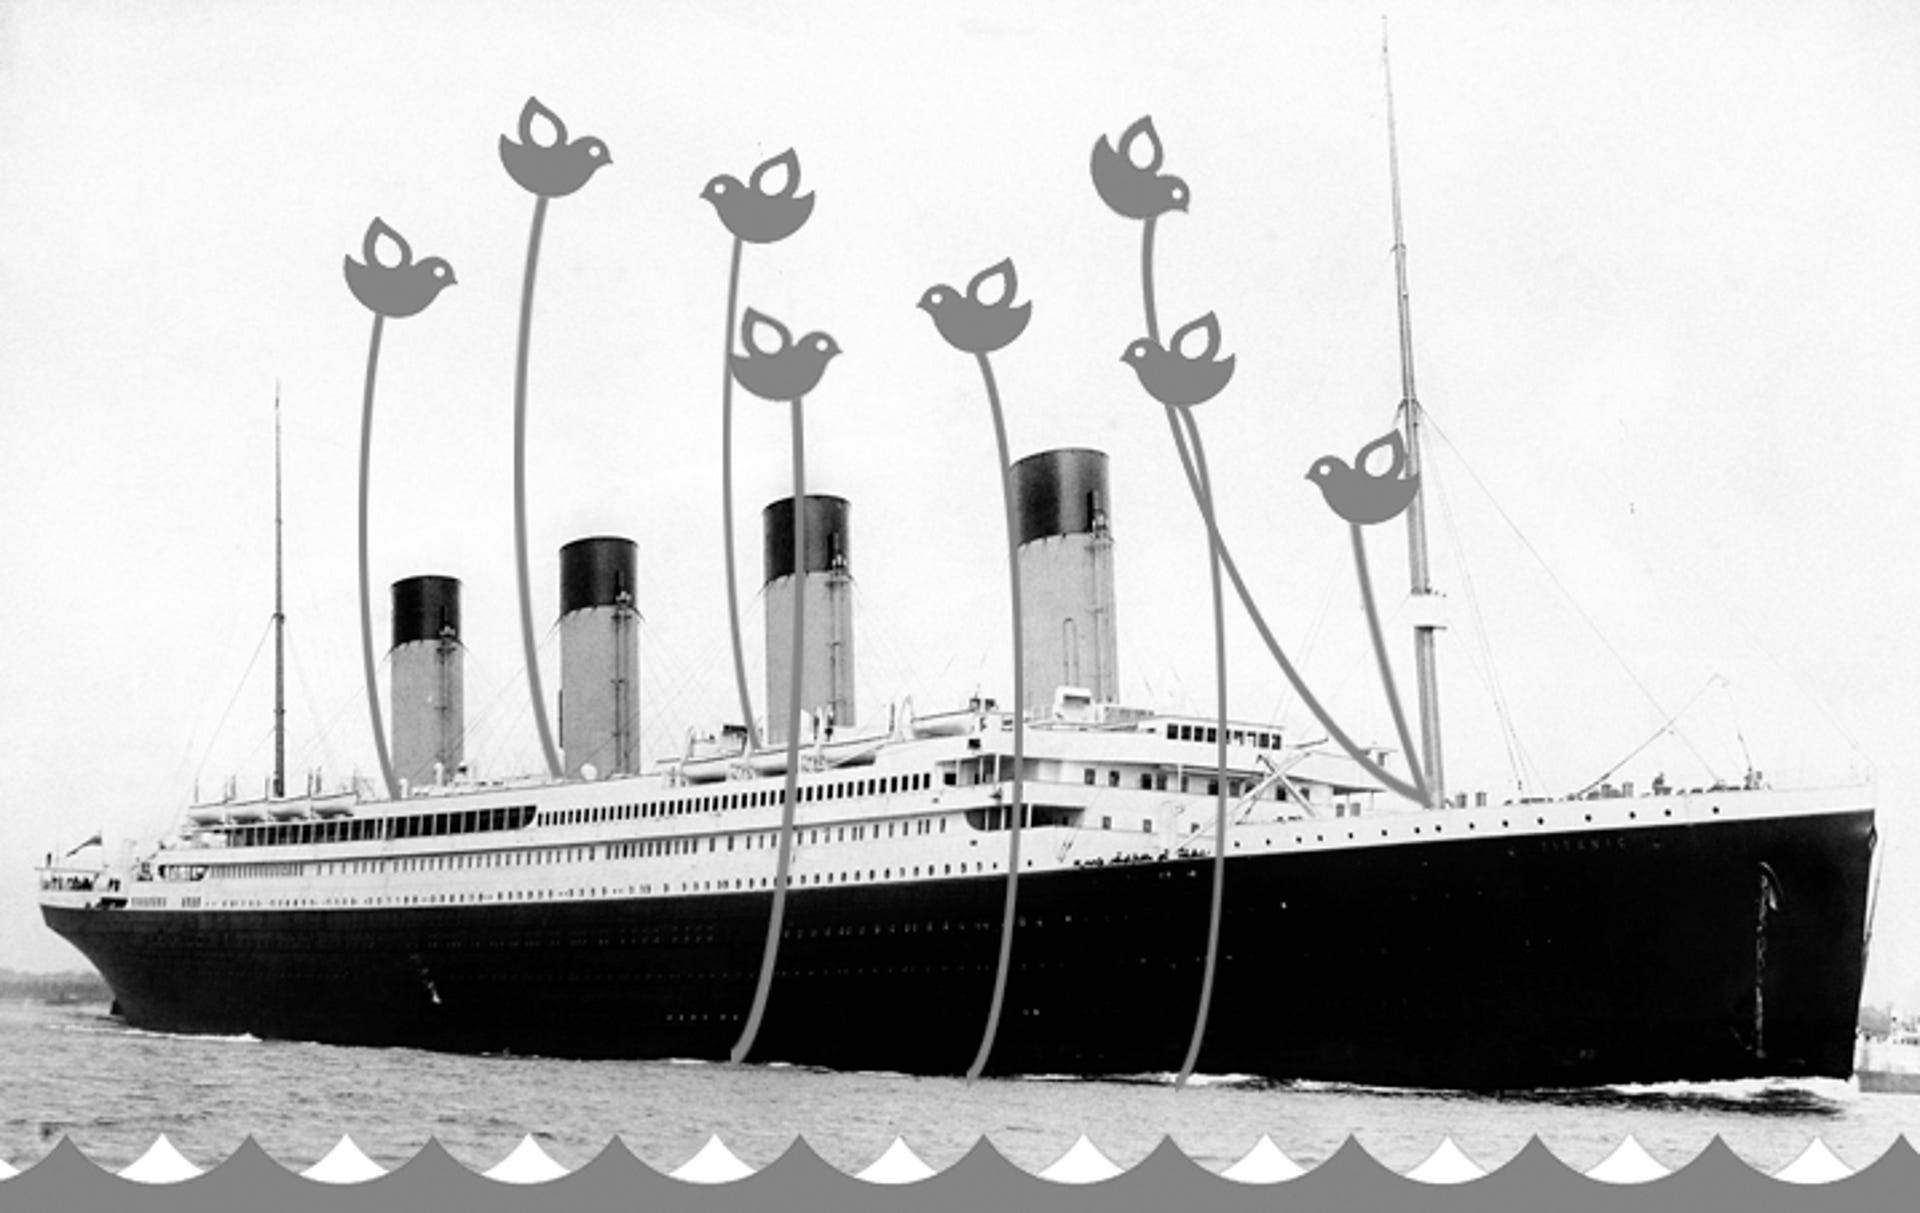 Titanic sinking tweeted in real-time, 104 years later - CNET